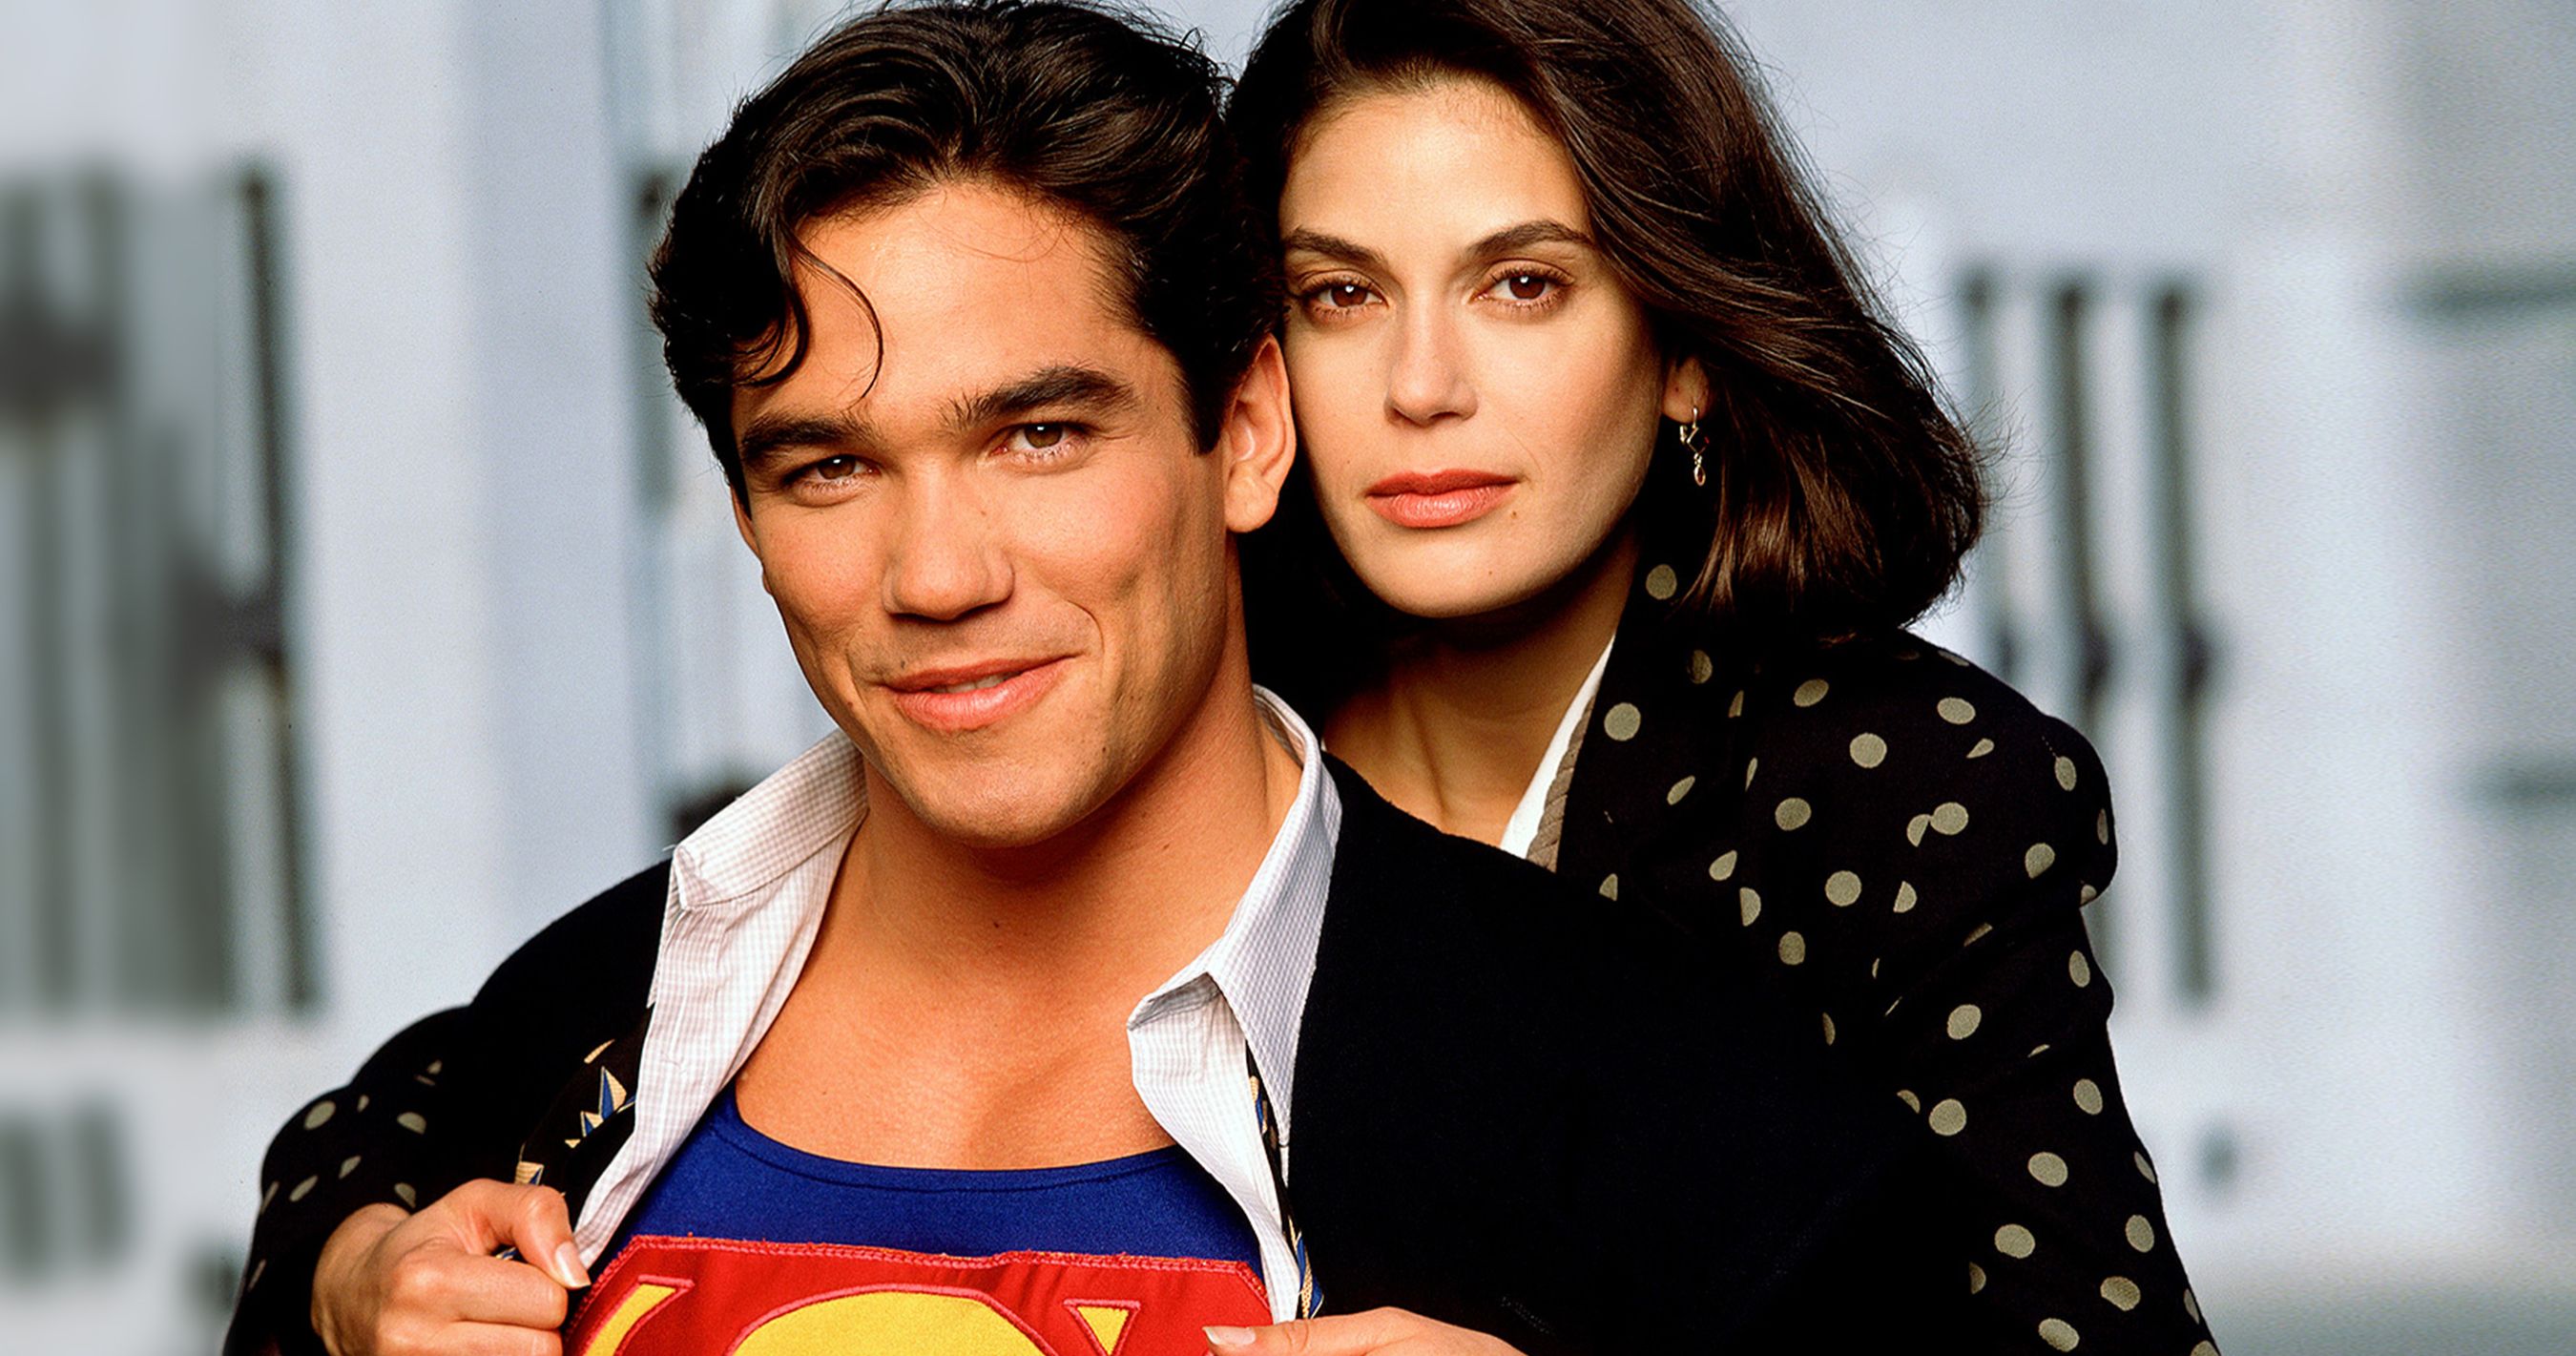 Lois &amp; Clark Revival Idea Revealed by Dean Cain, Turns Superman Into a Dad